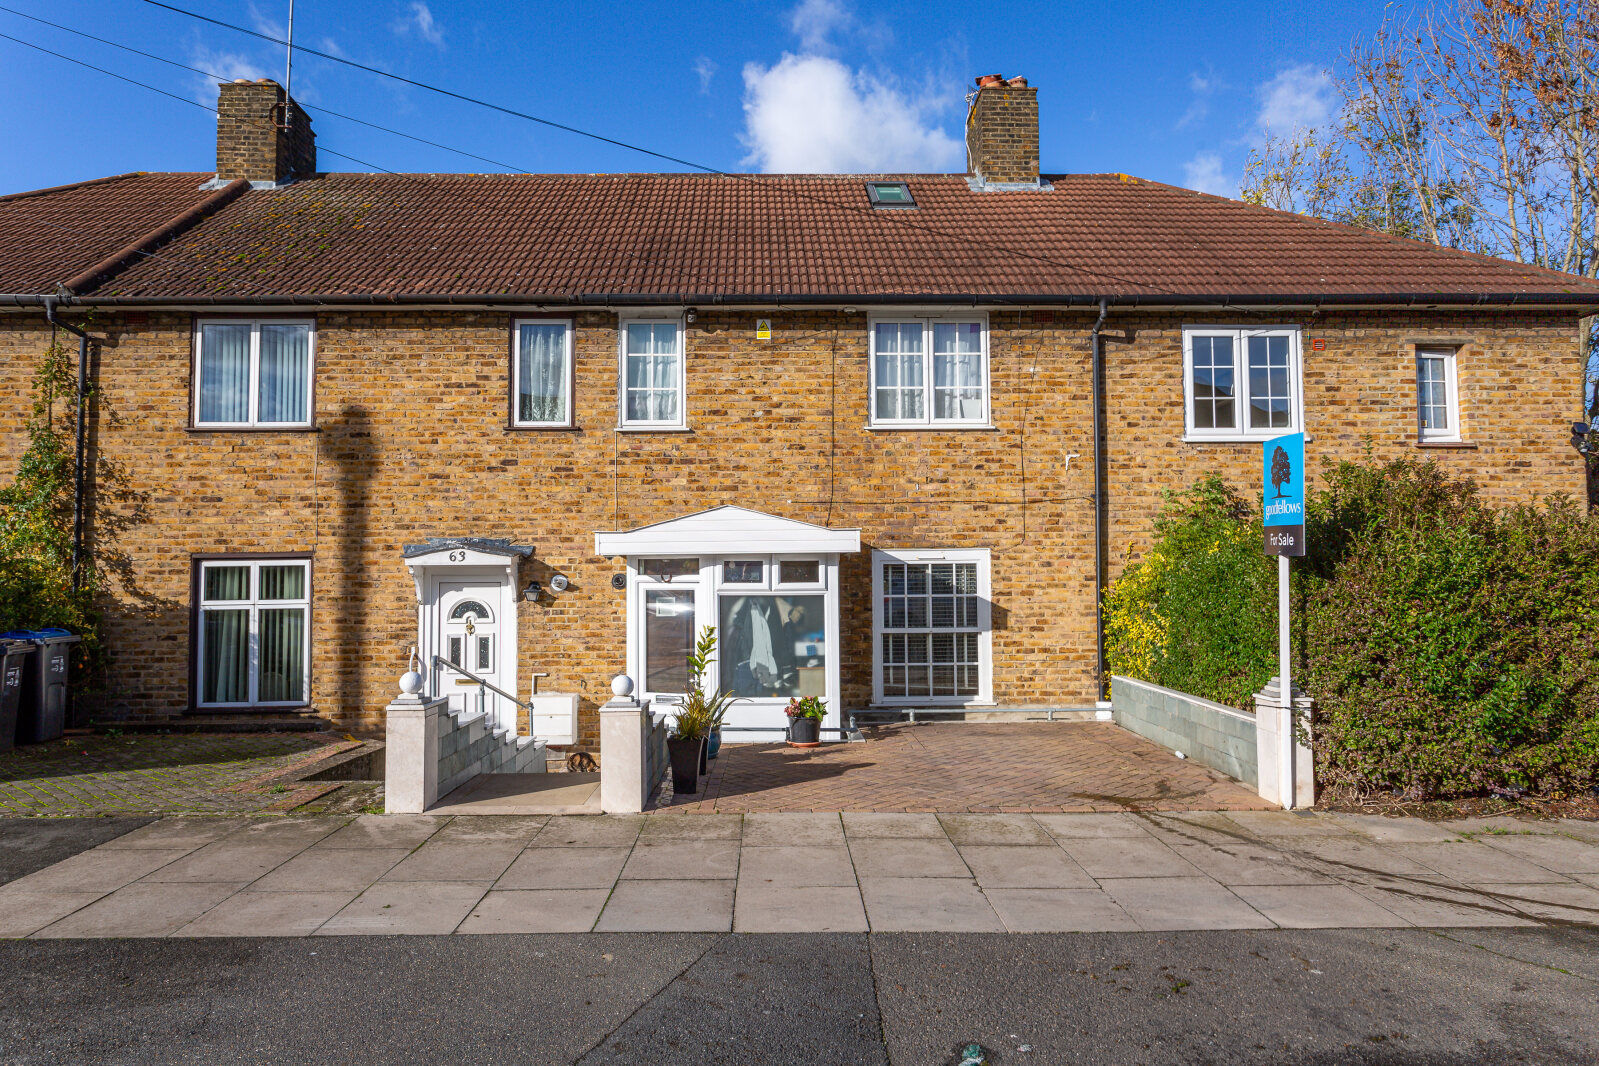 4 bedroom mid terraced house for sale Montacute Road, Morden, SM4, main image